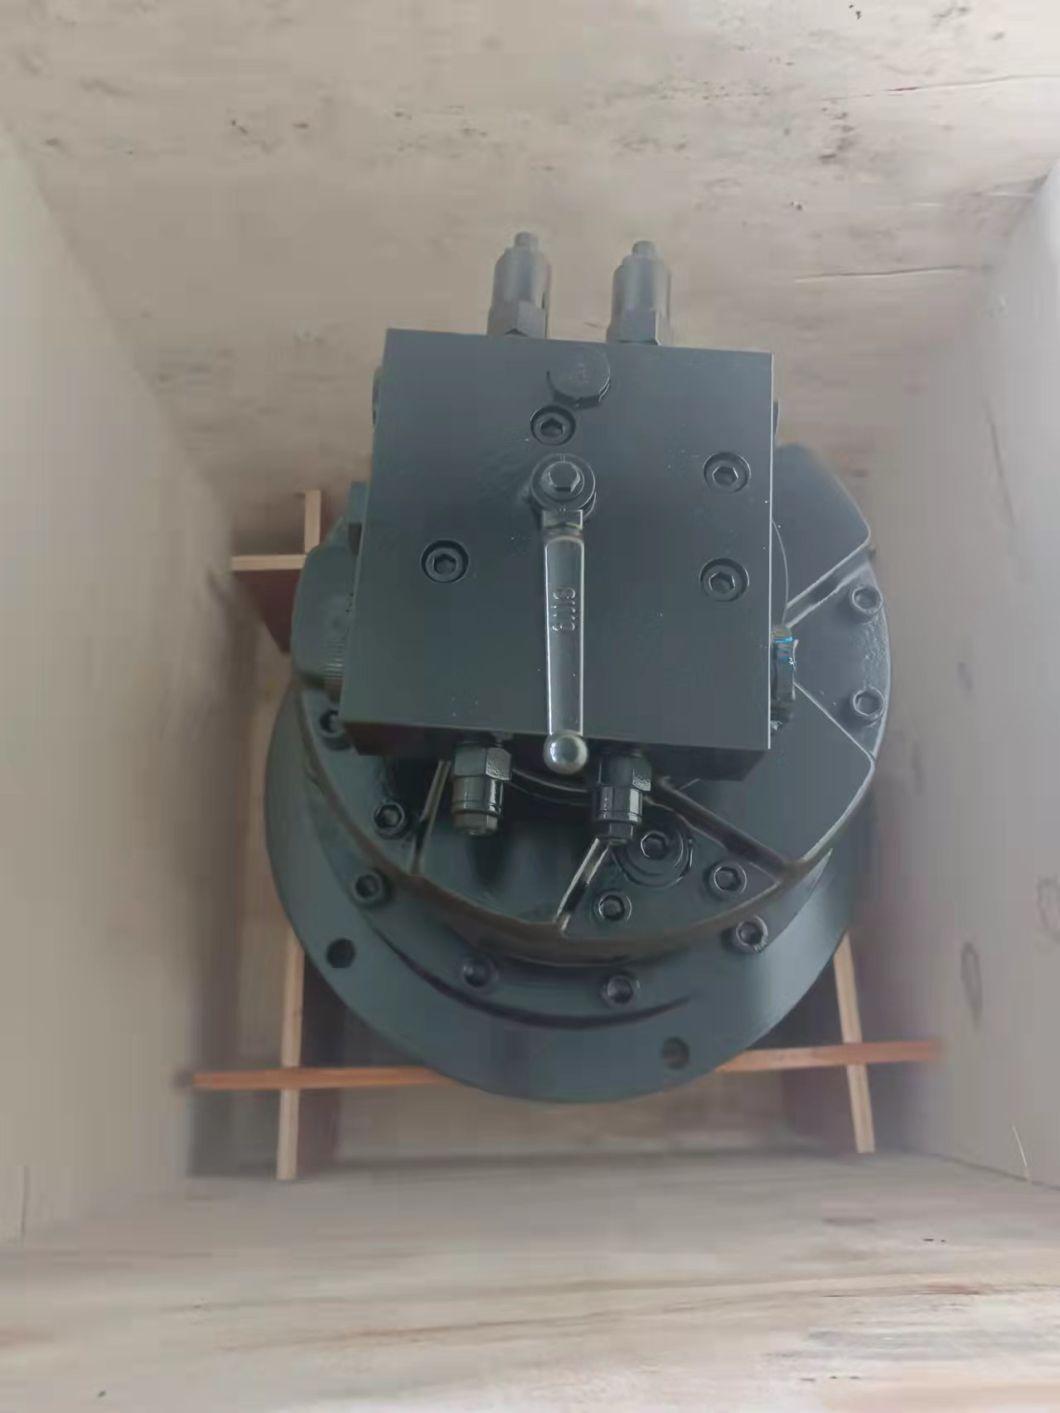 Italy Sai GM2-2700 Radial Piston Low Speed High Torque Rpm Inner Five Star Hydraulic Motor for Winch, Anchor, Saw Crane